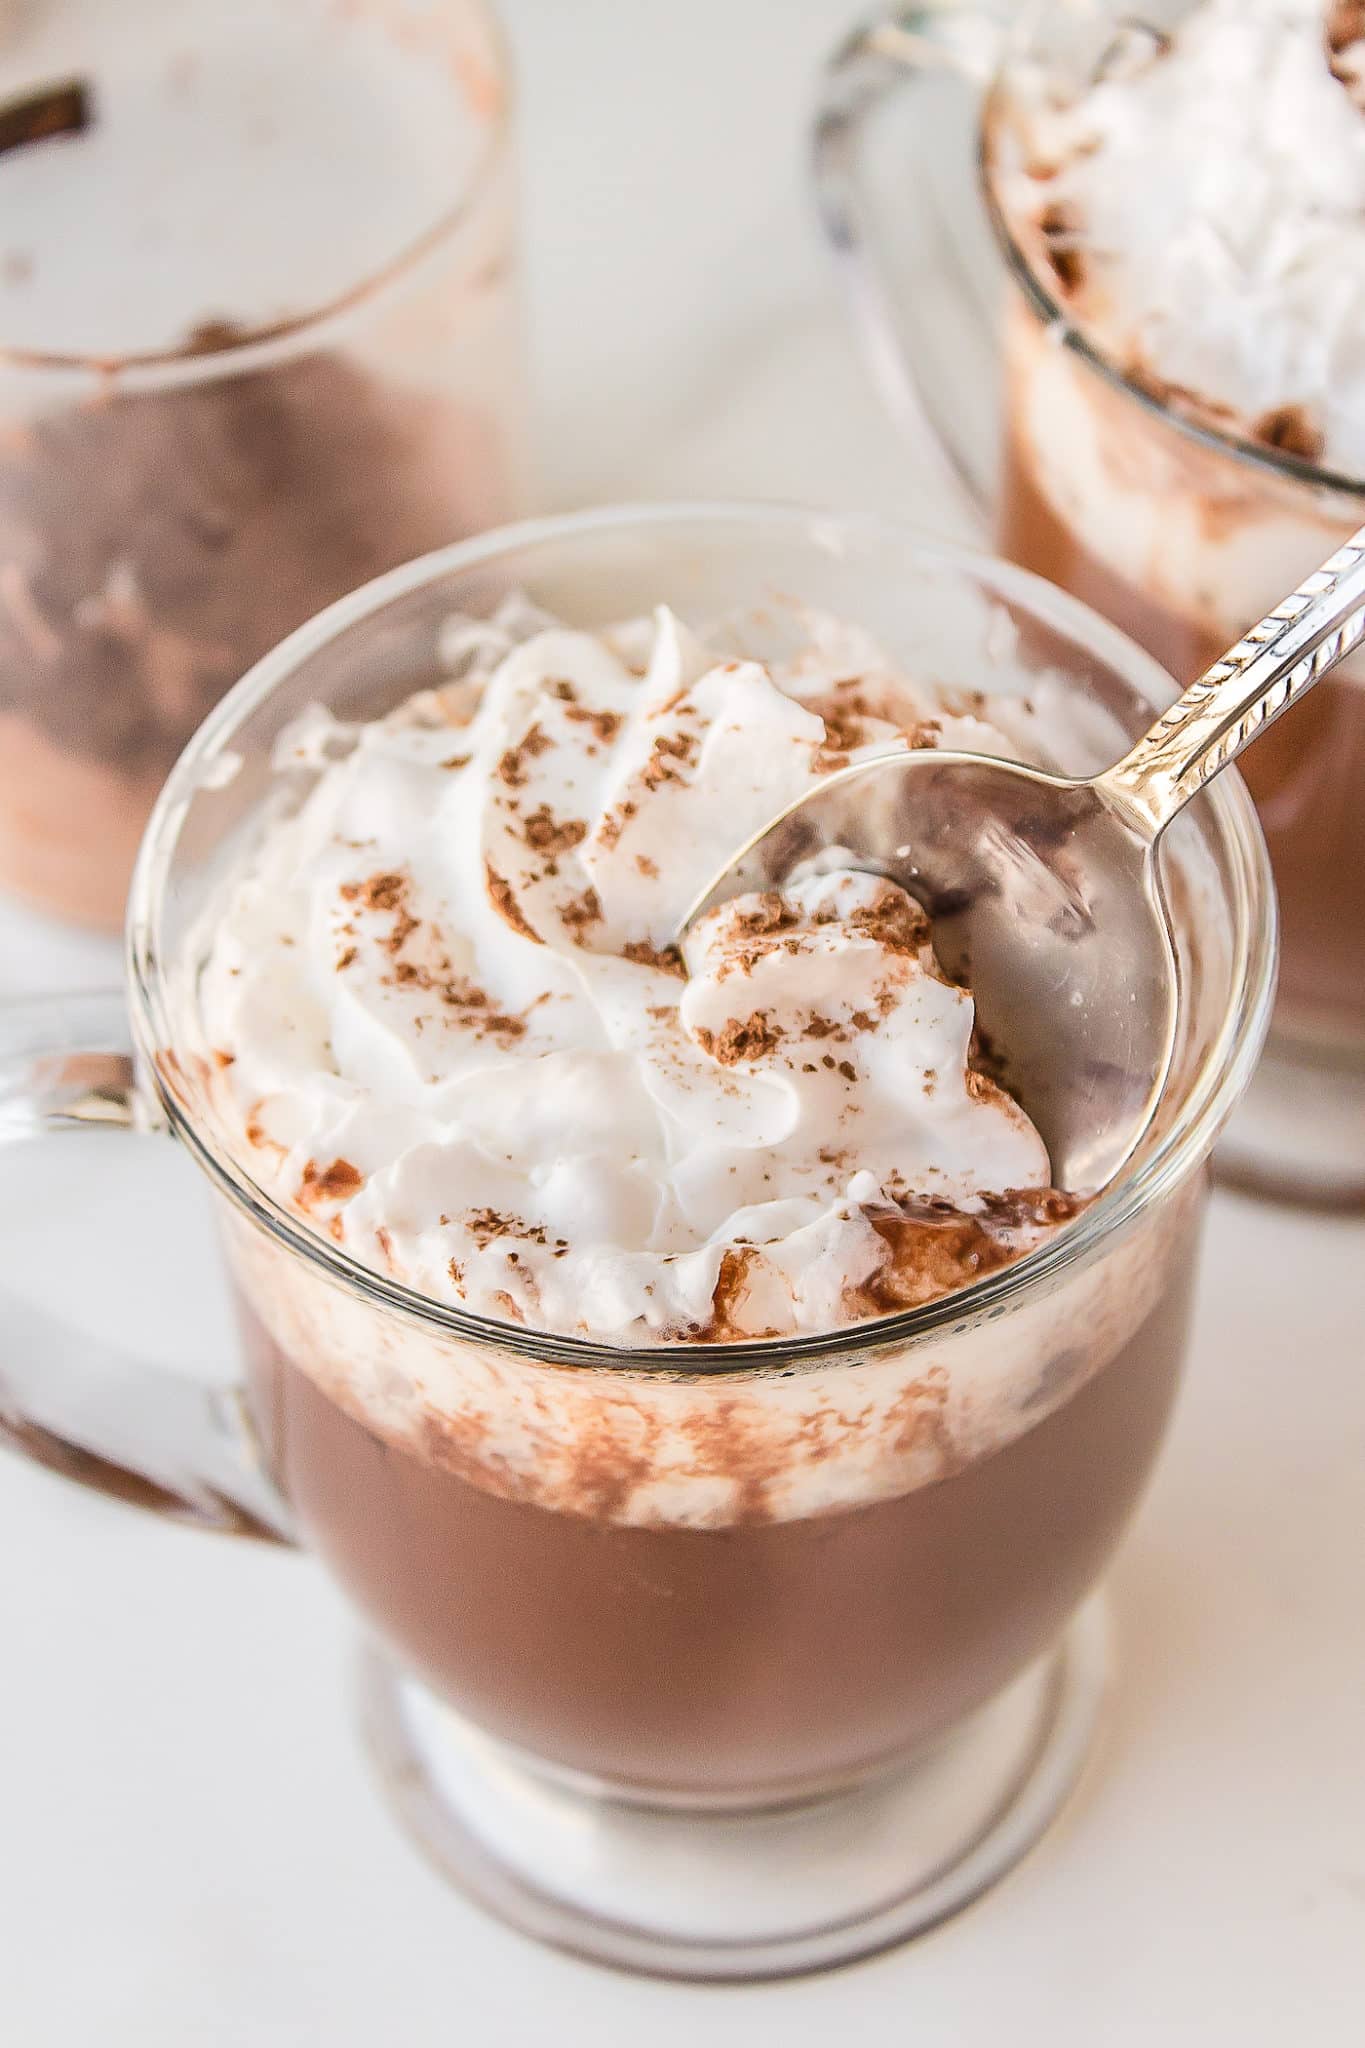 mug of healthy hot chocolate with a spoonful of whipped cream.